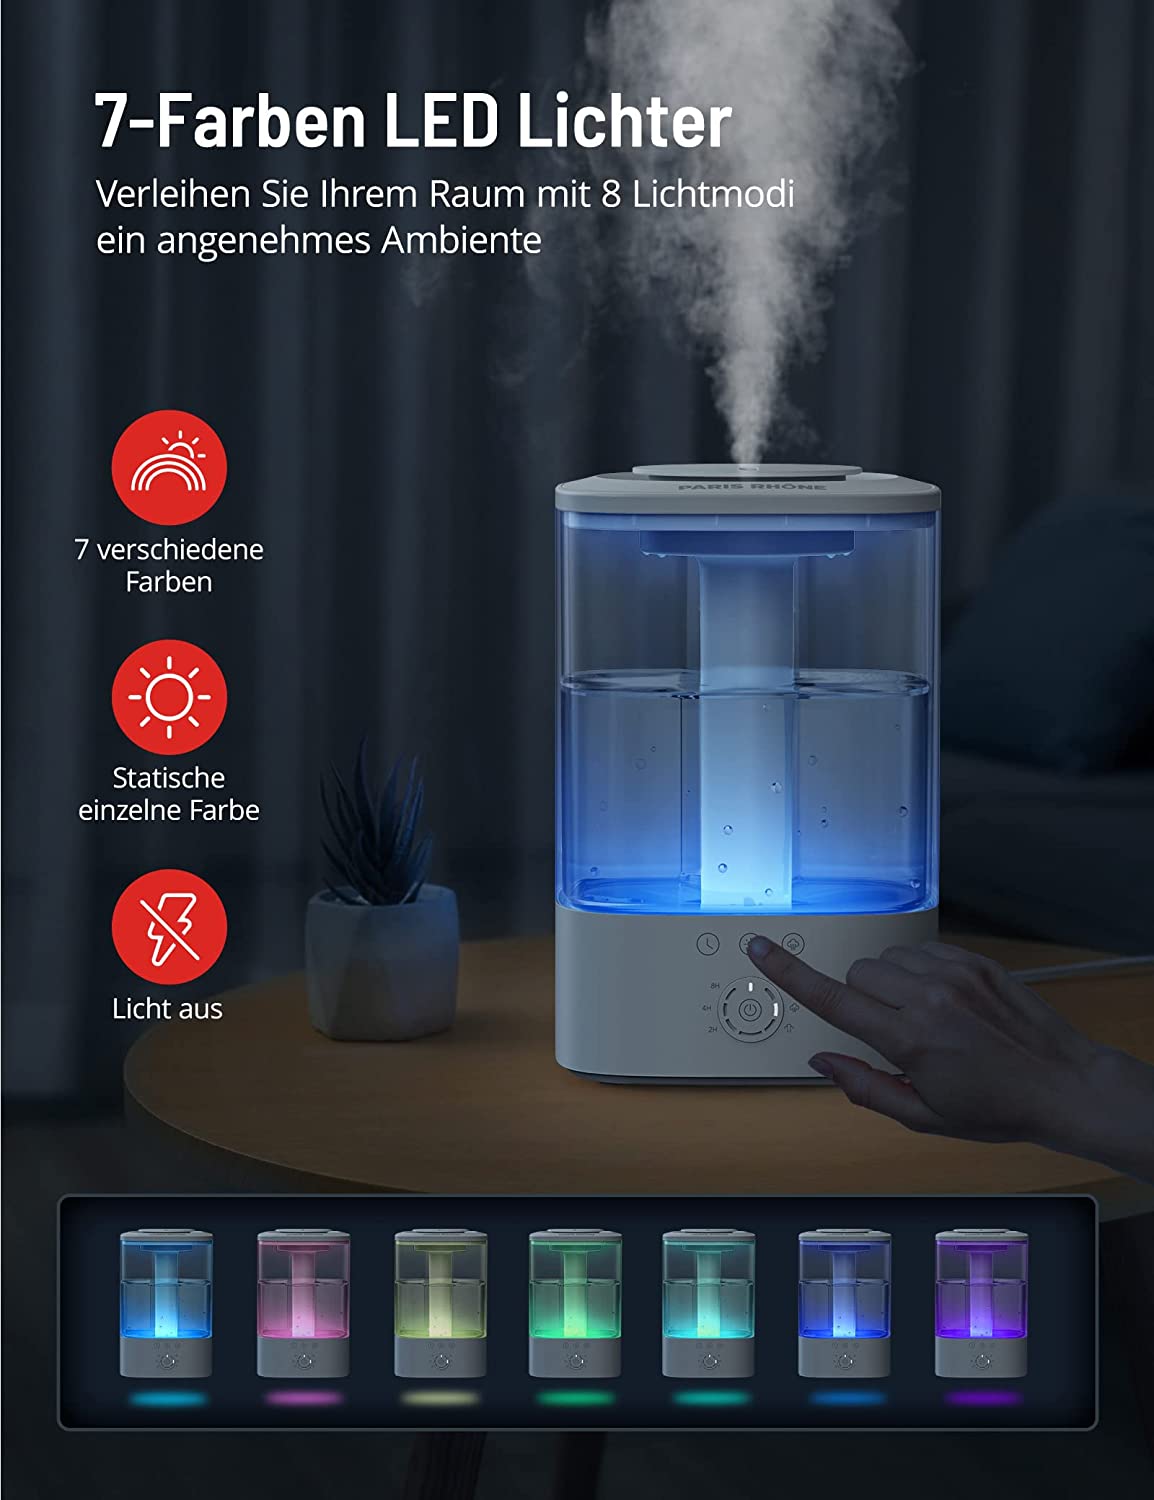 Humidifier Bedroom 3.5L Top-Fill Humidifier Aroma Diffuser, 30H BPA-Free Quiet Room Humidifier